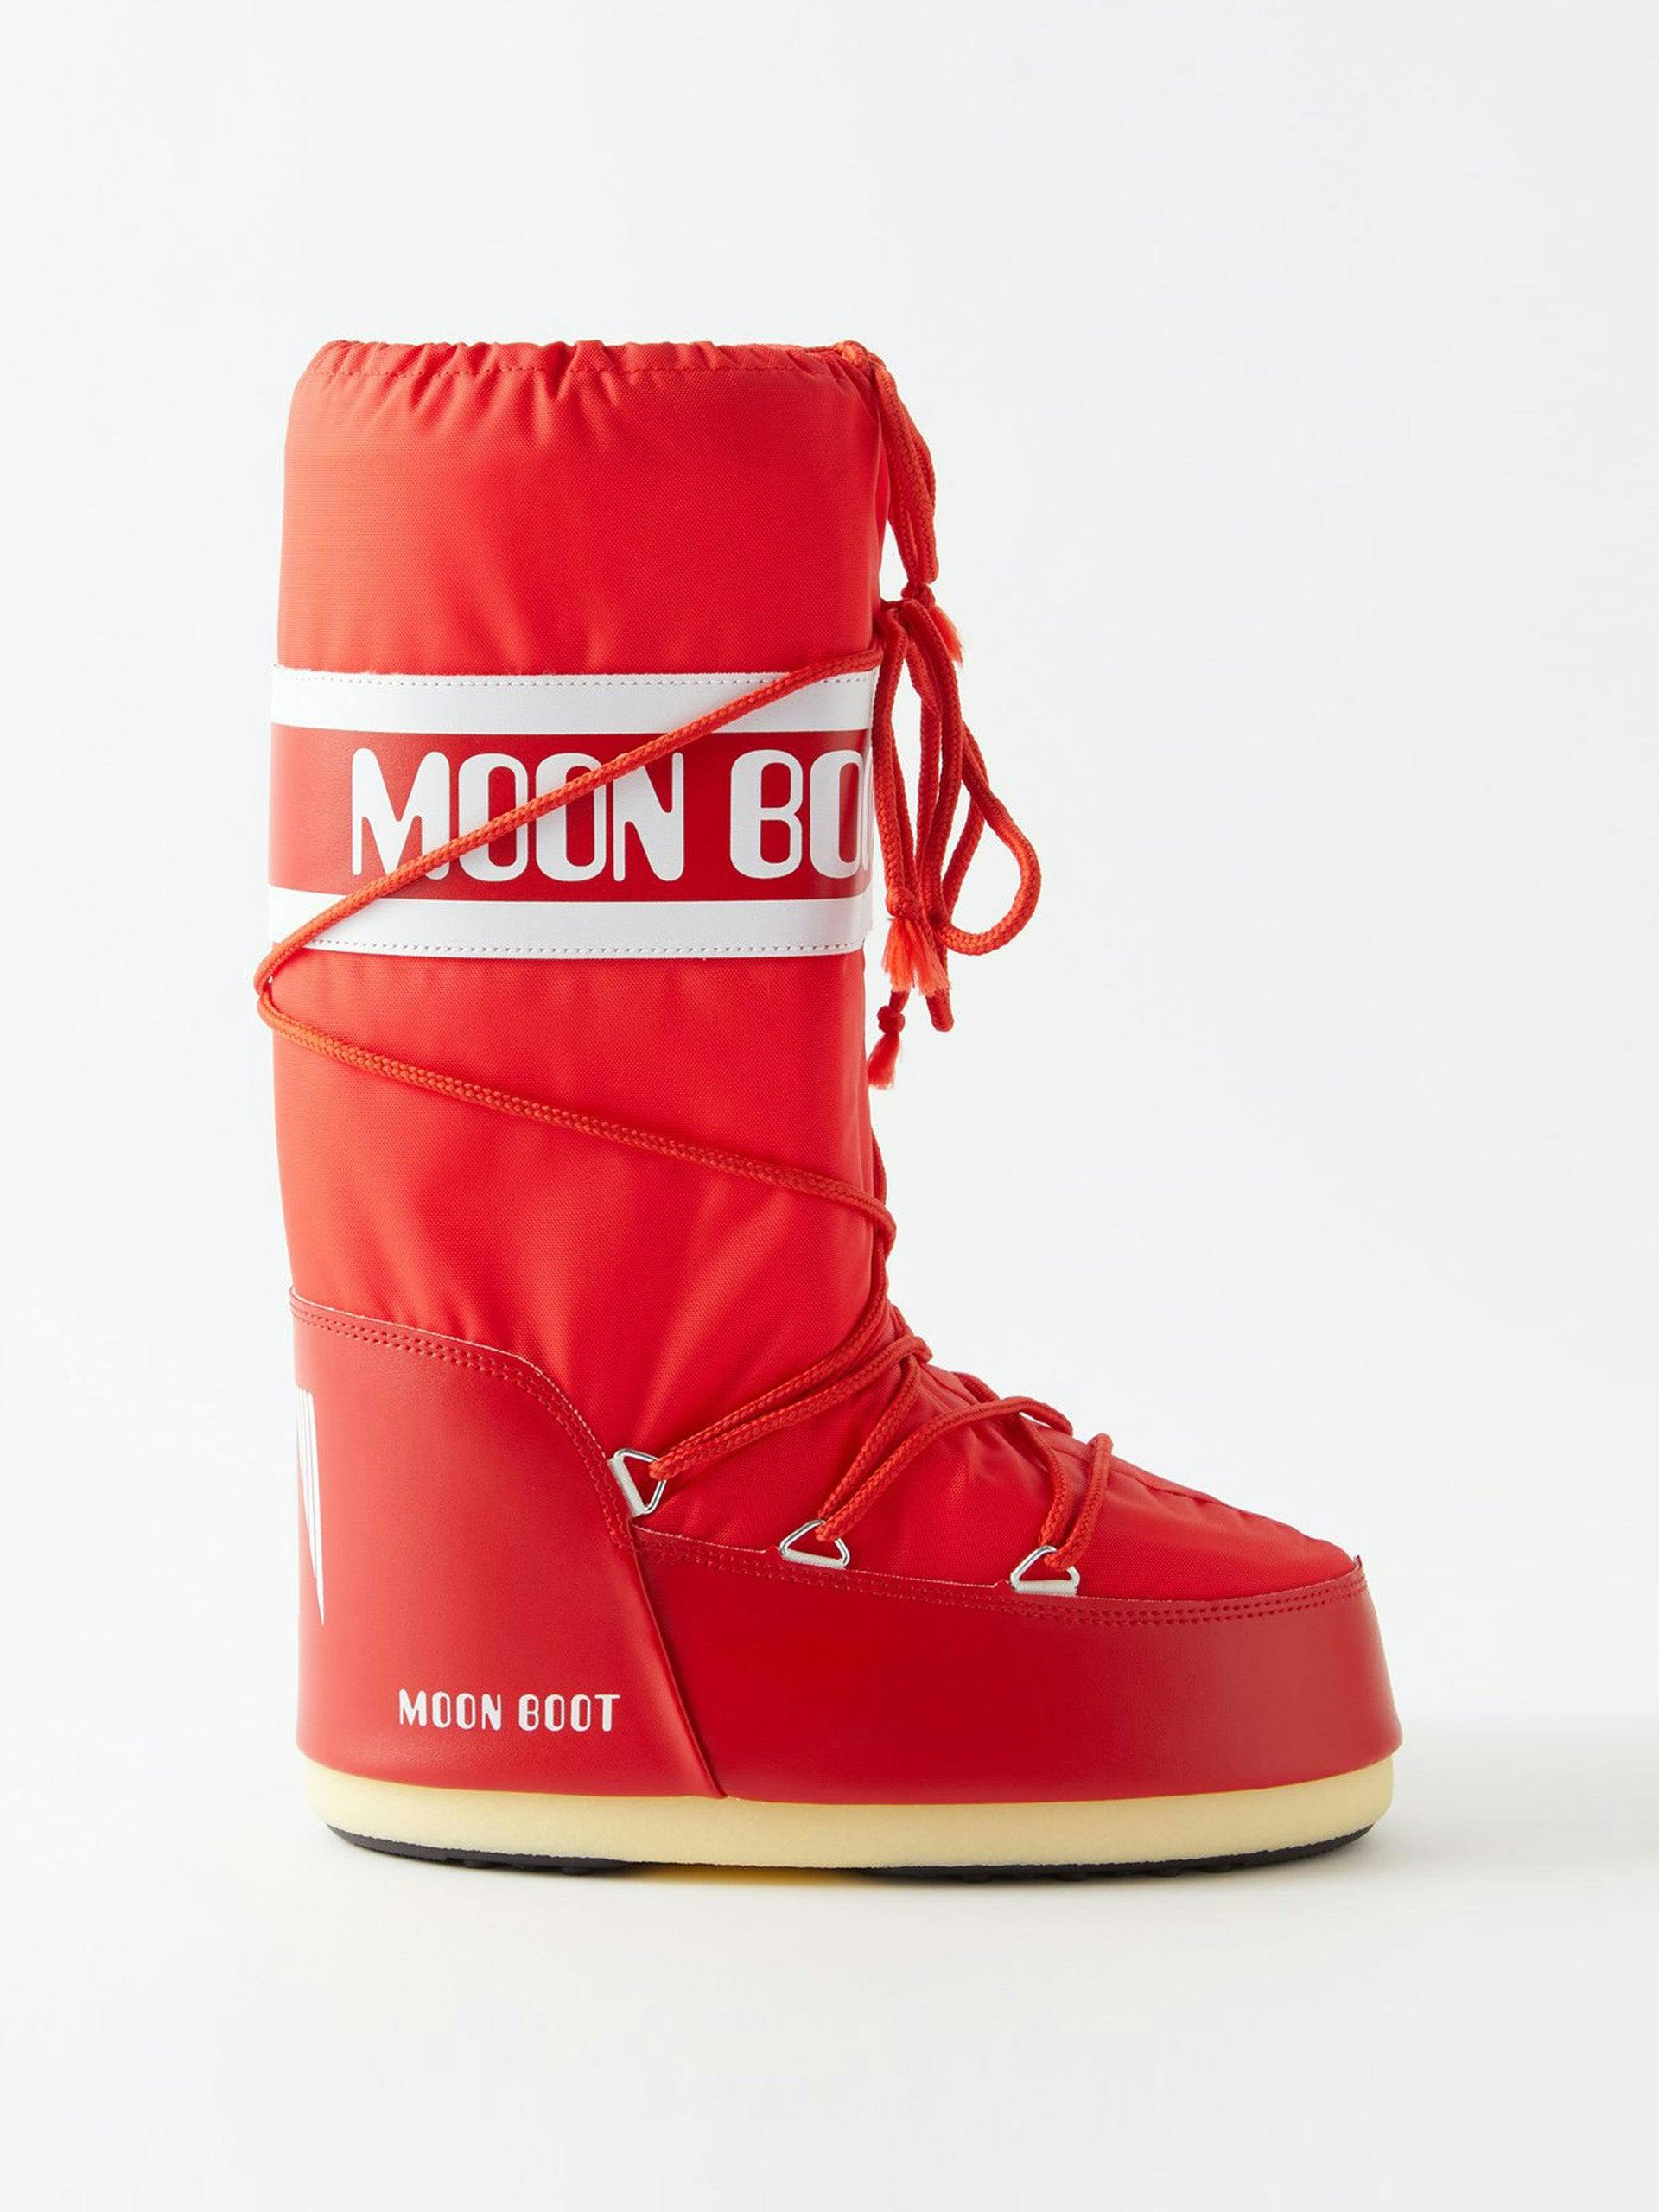 Bright red snow boots